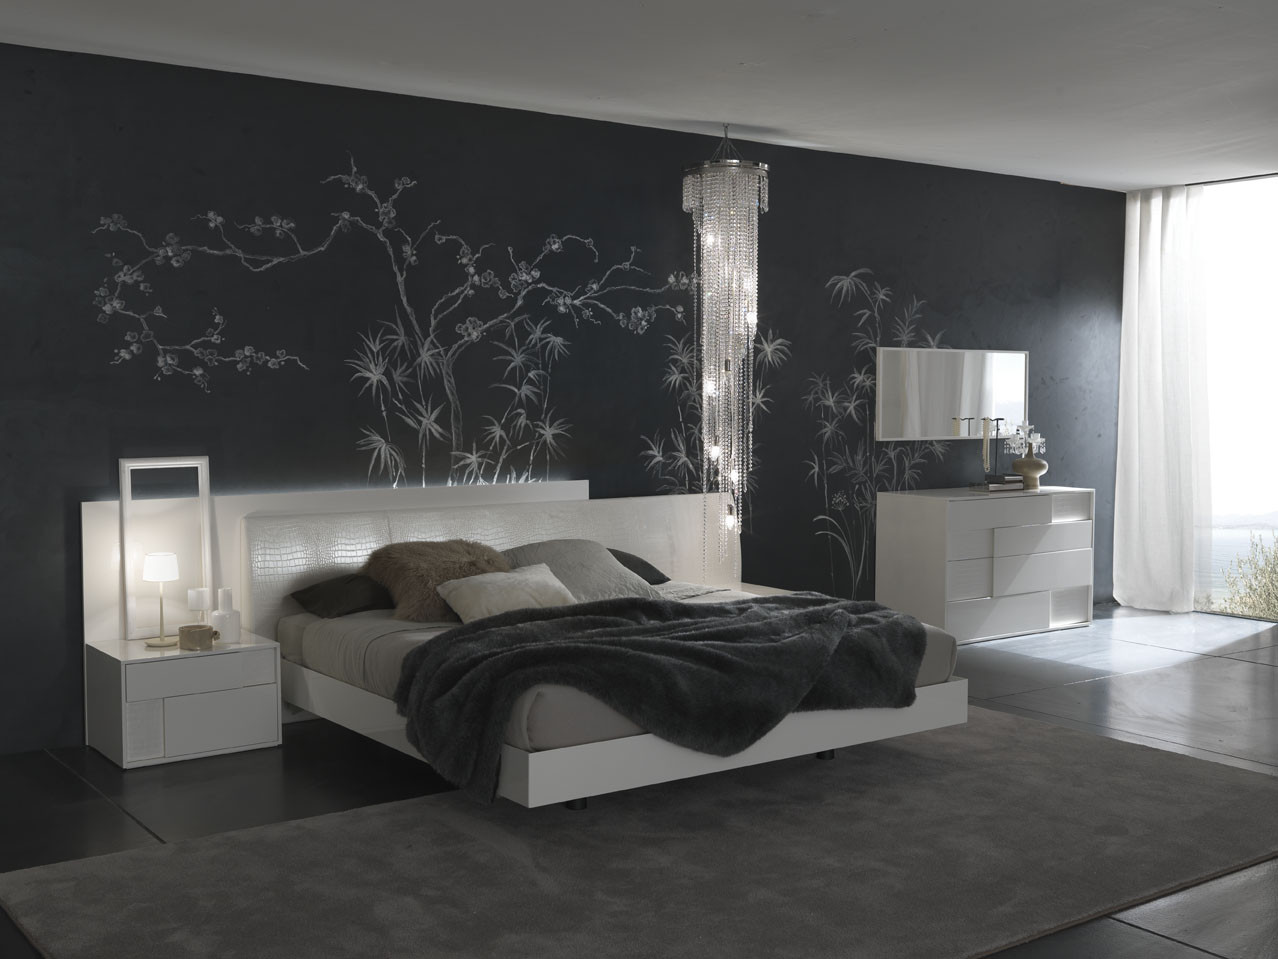 Ideas For Bedroom Wall
 Bedroom Decorating Ideas from Evinco